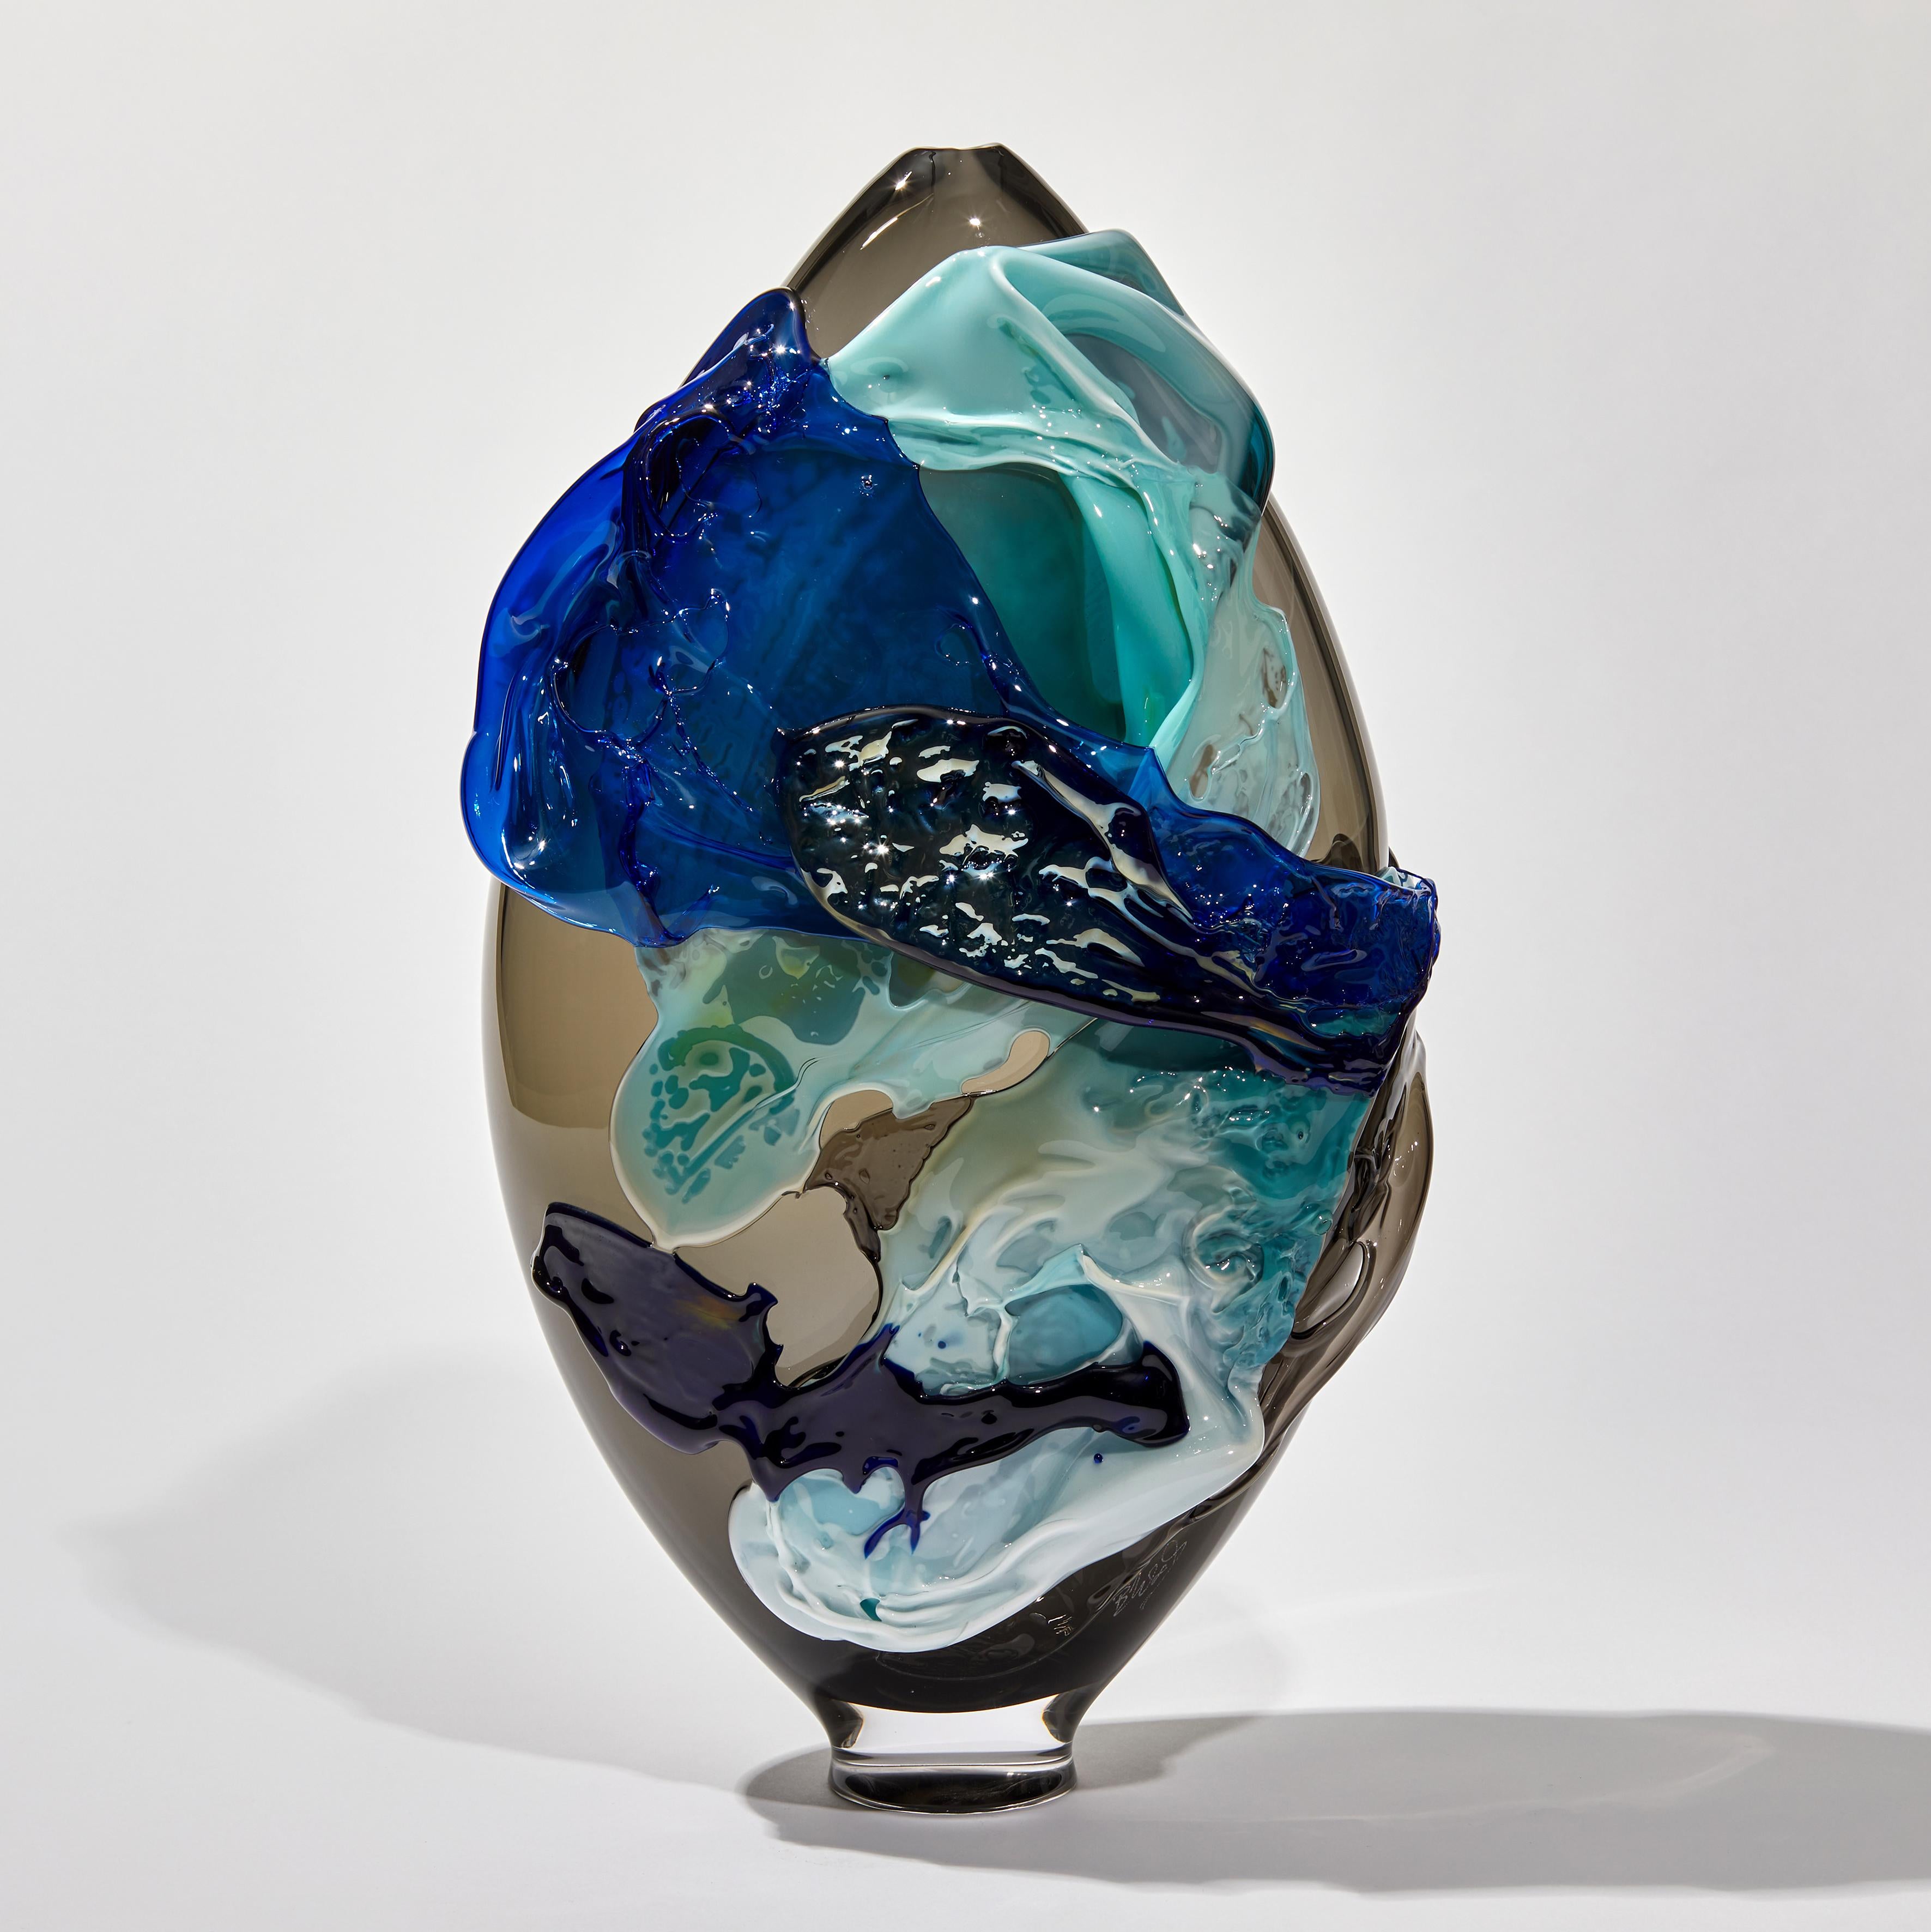 Torrent is a unique blue, aqua, black and smoke glass vase from the Molten Landscapes Collection by the British artist Bethany Wood. An equal passion for painting physically inspires how she controls and manipulates her glass. Recreating the